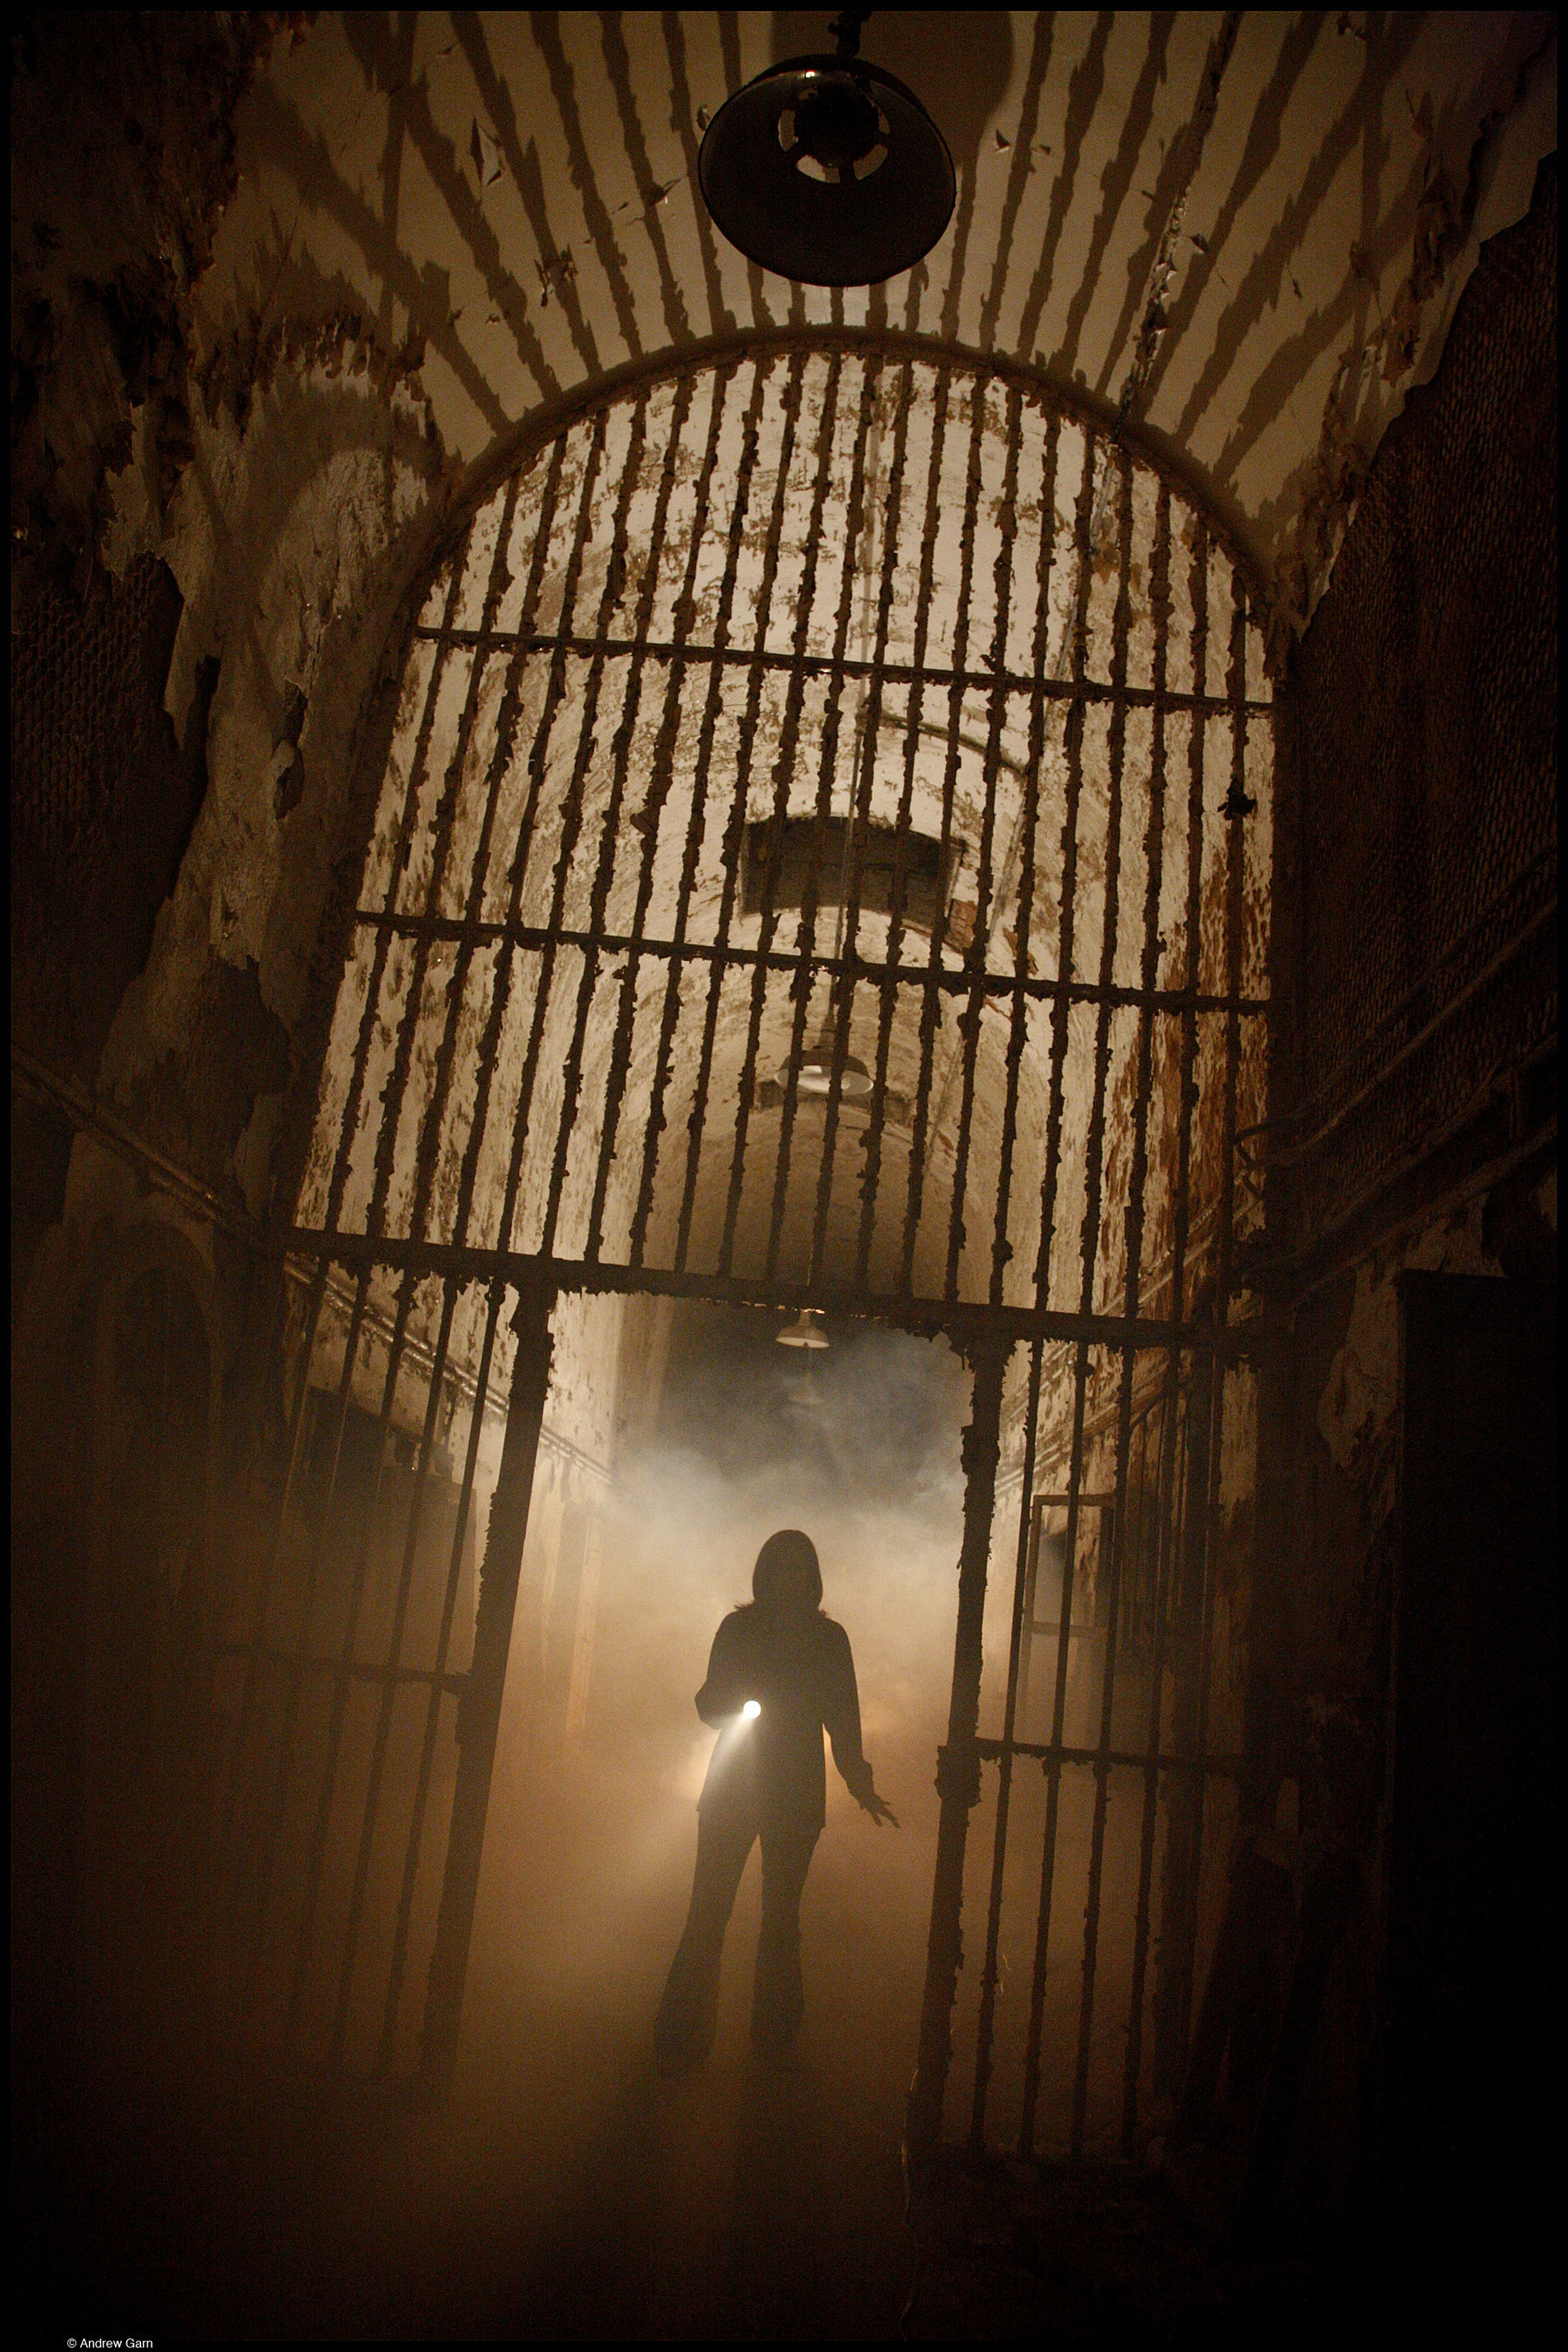 Terror Behind the Walls at Eastern State Penitentiary is a massive haunted house located inside the cellblocks of a real abandoned prison in Philadelphia.